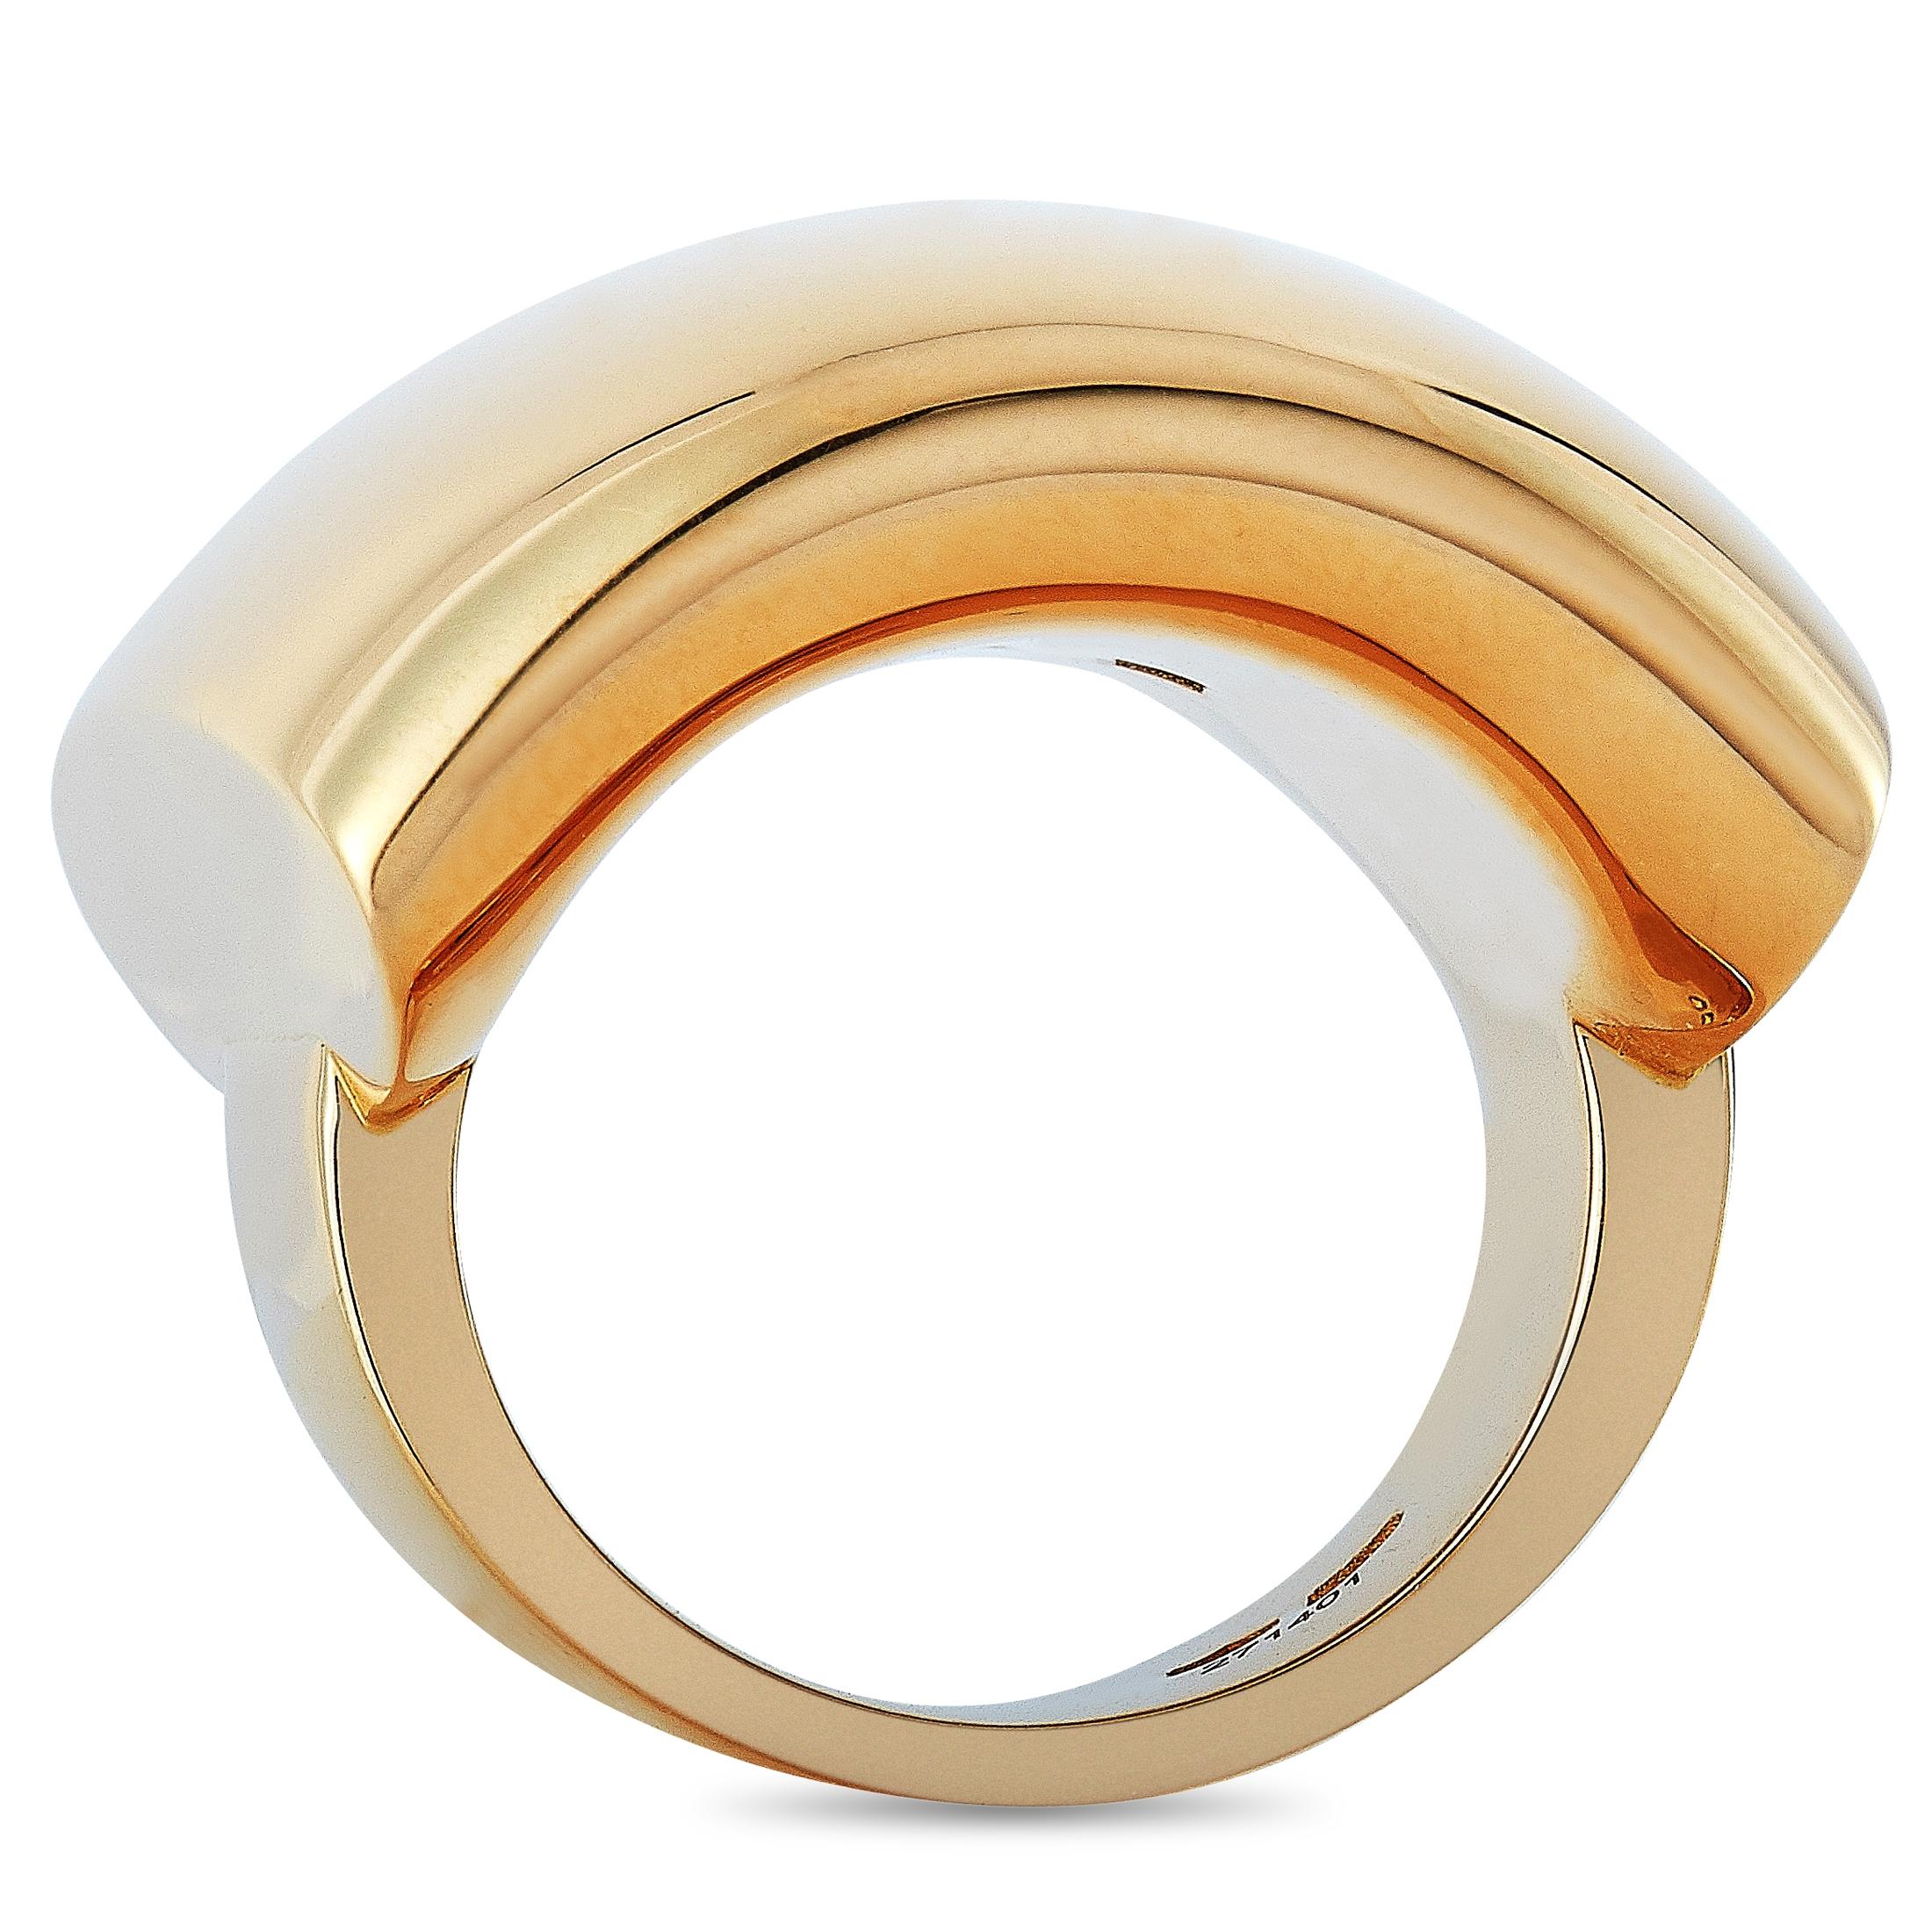 The Vhernier “Fibula” ring is crafted from 18K rose gold and weighs 19.8 grams. The ring boasts band thickness of 7 mm and top height of 7 mm, while top dimensions measure 31 by 22 mm.
Ring Size: 7.5

This item is offered in brand new condition and